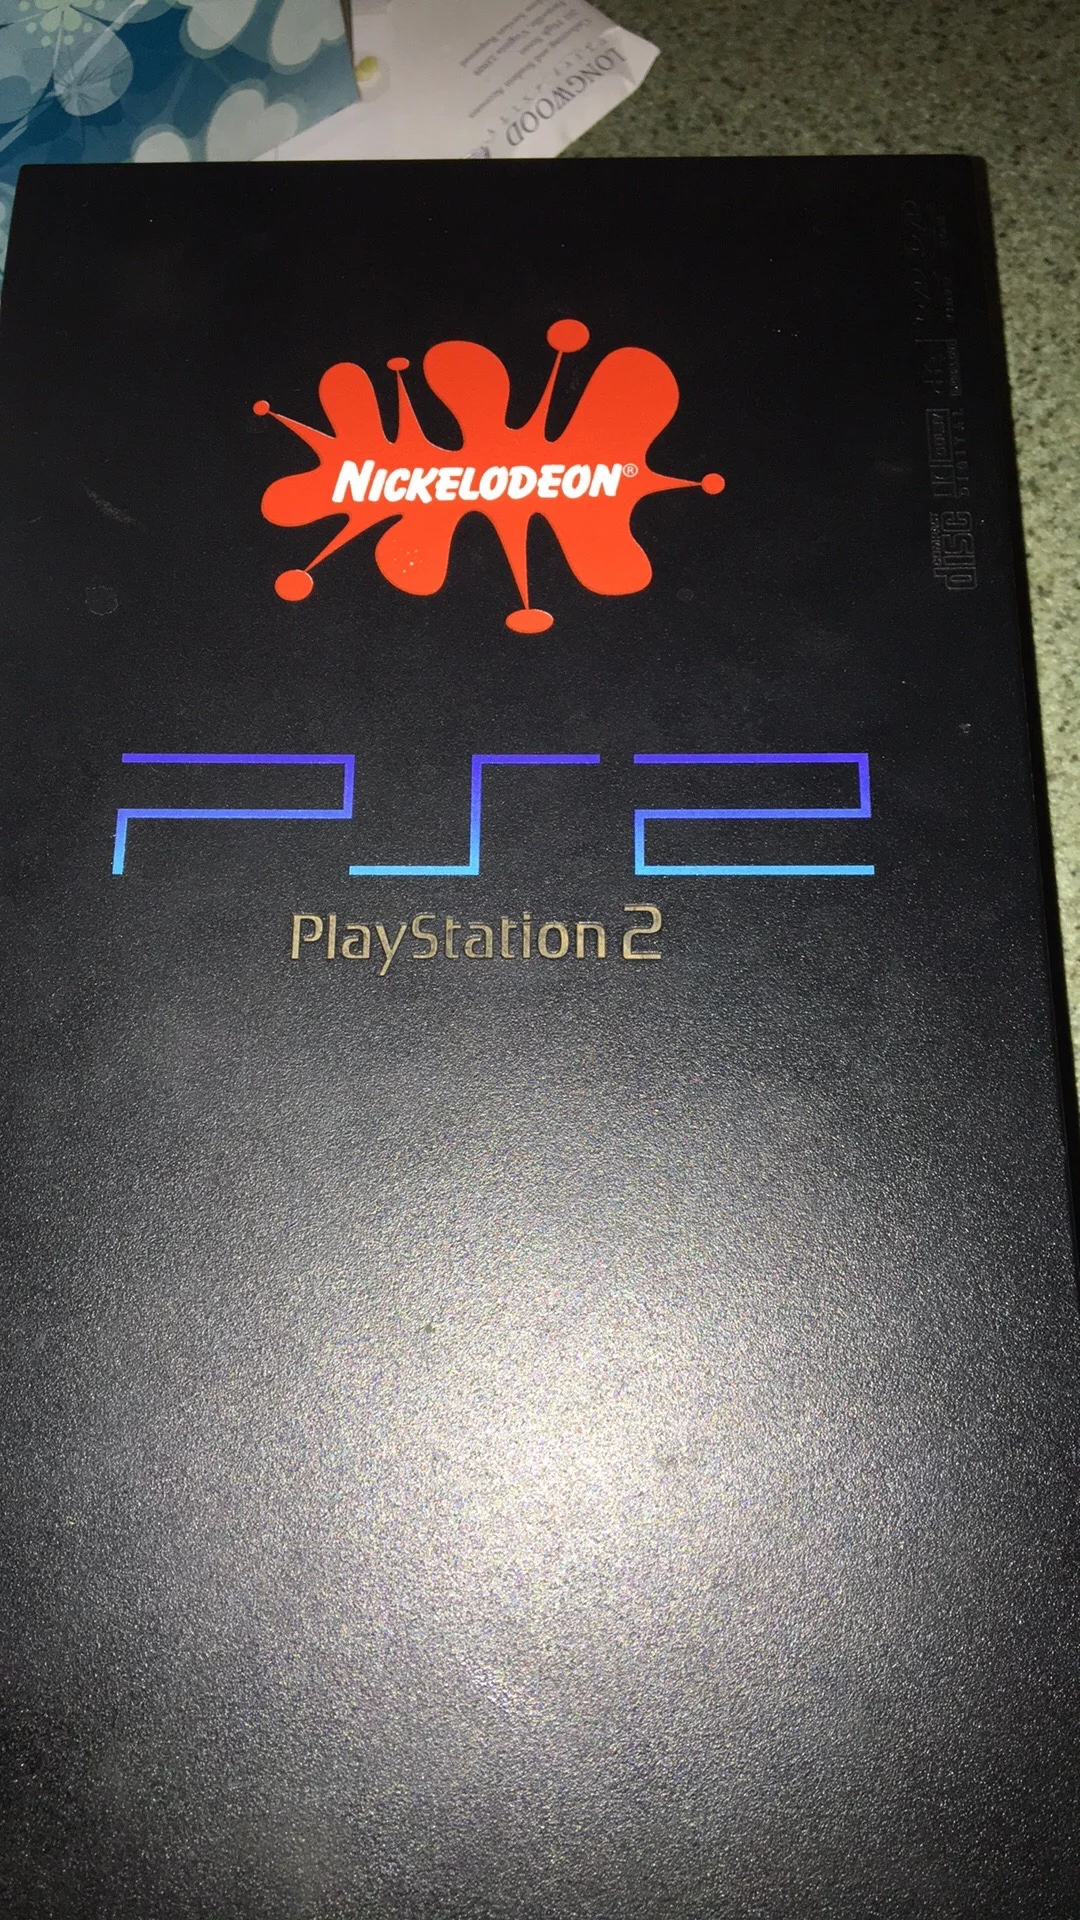  Sony PlayStation 2 Nickelodeon Console